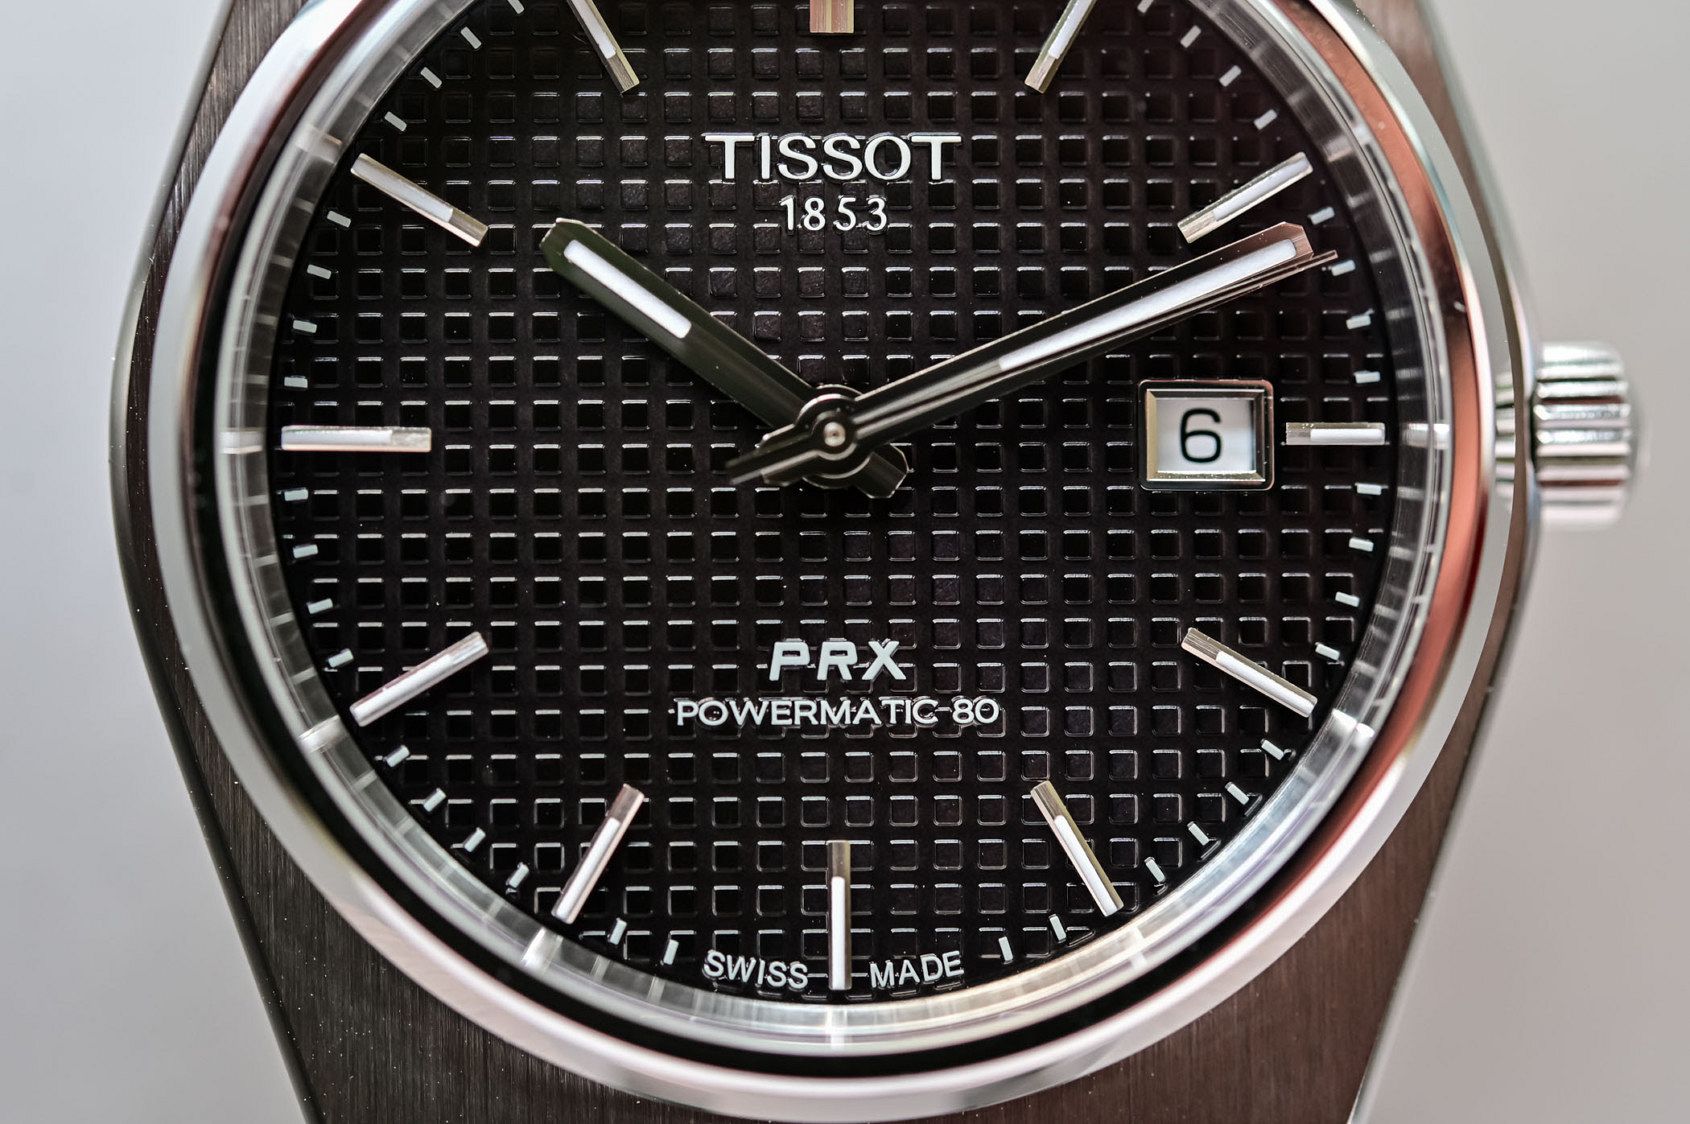 It's here! Aussies can now preorder the new Tissot PRX Powermatic 80 in